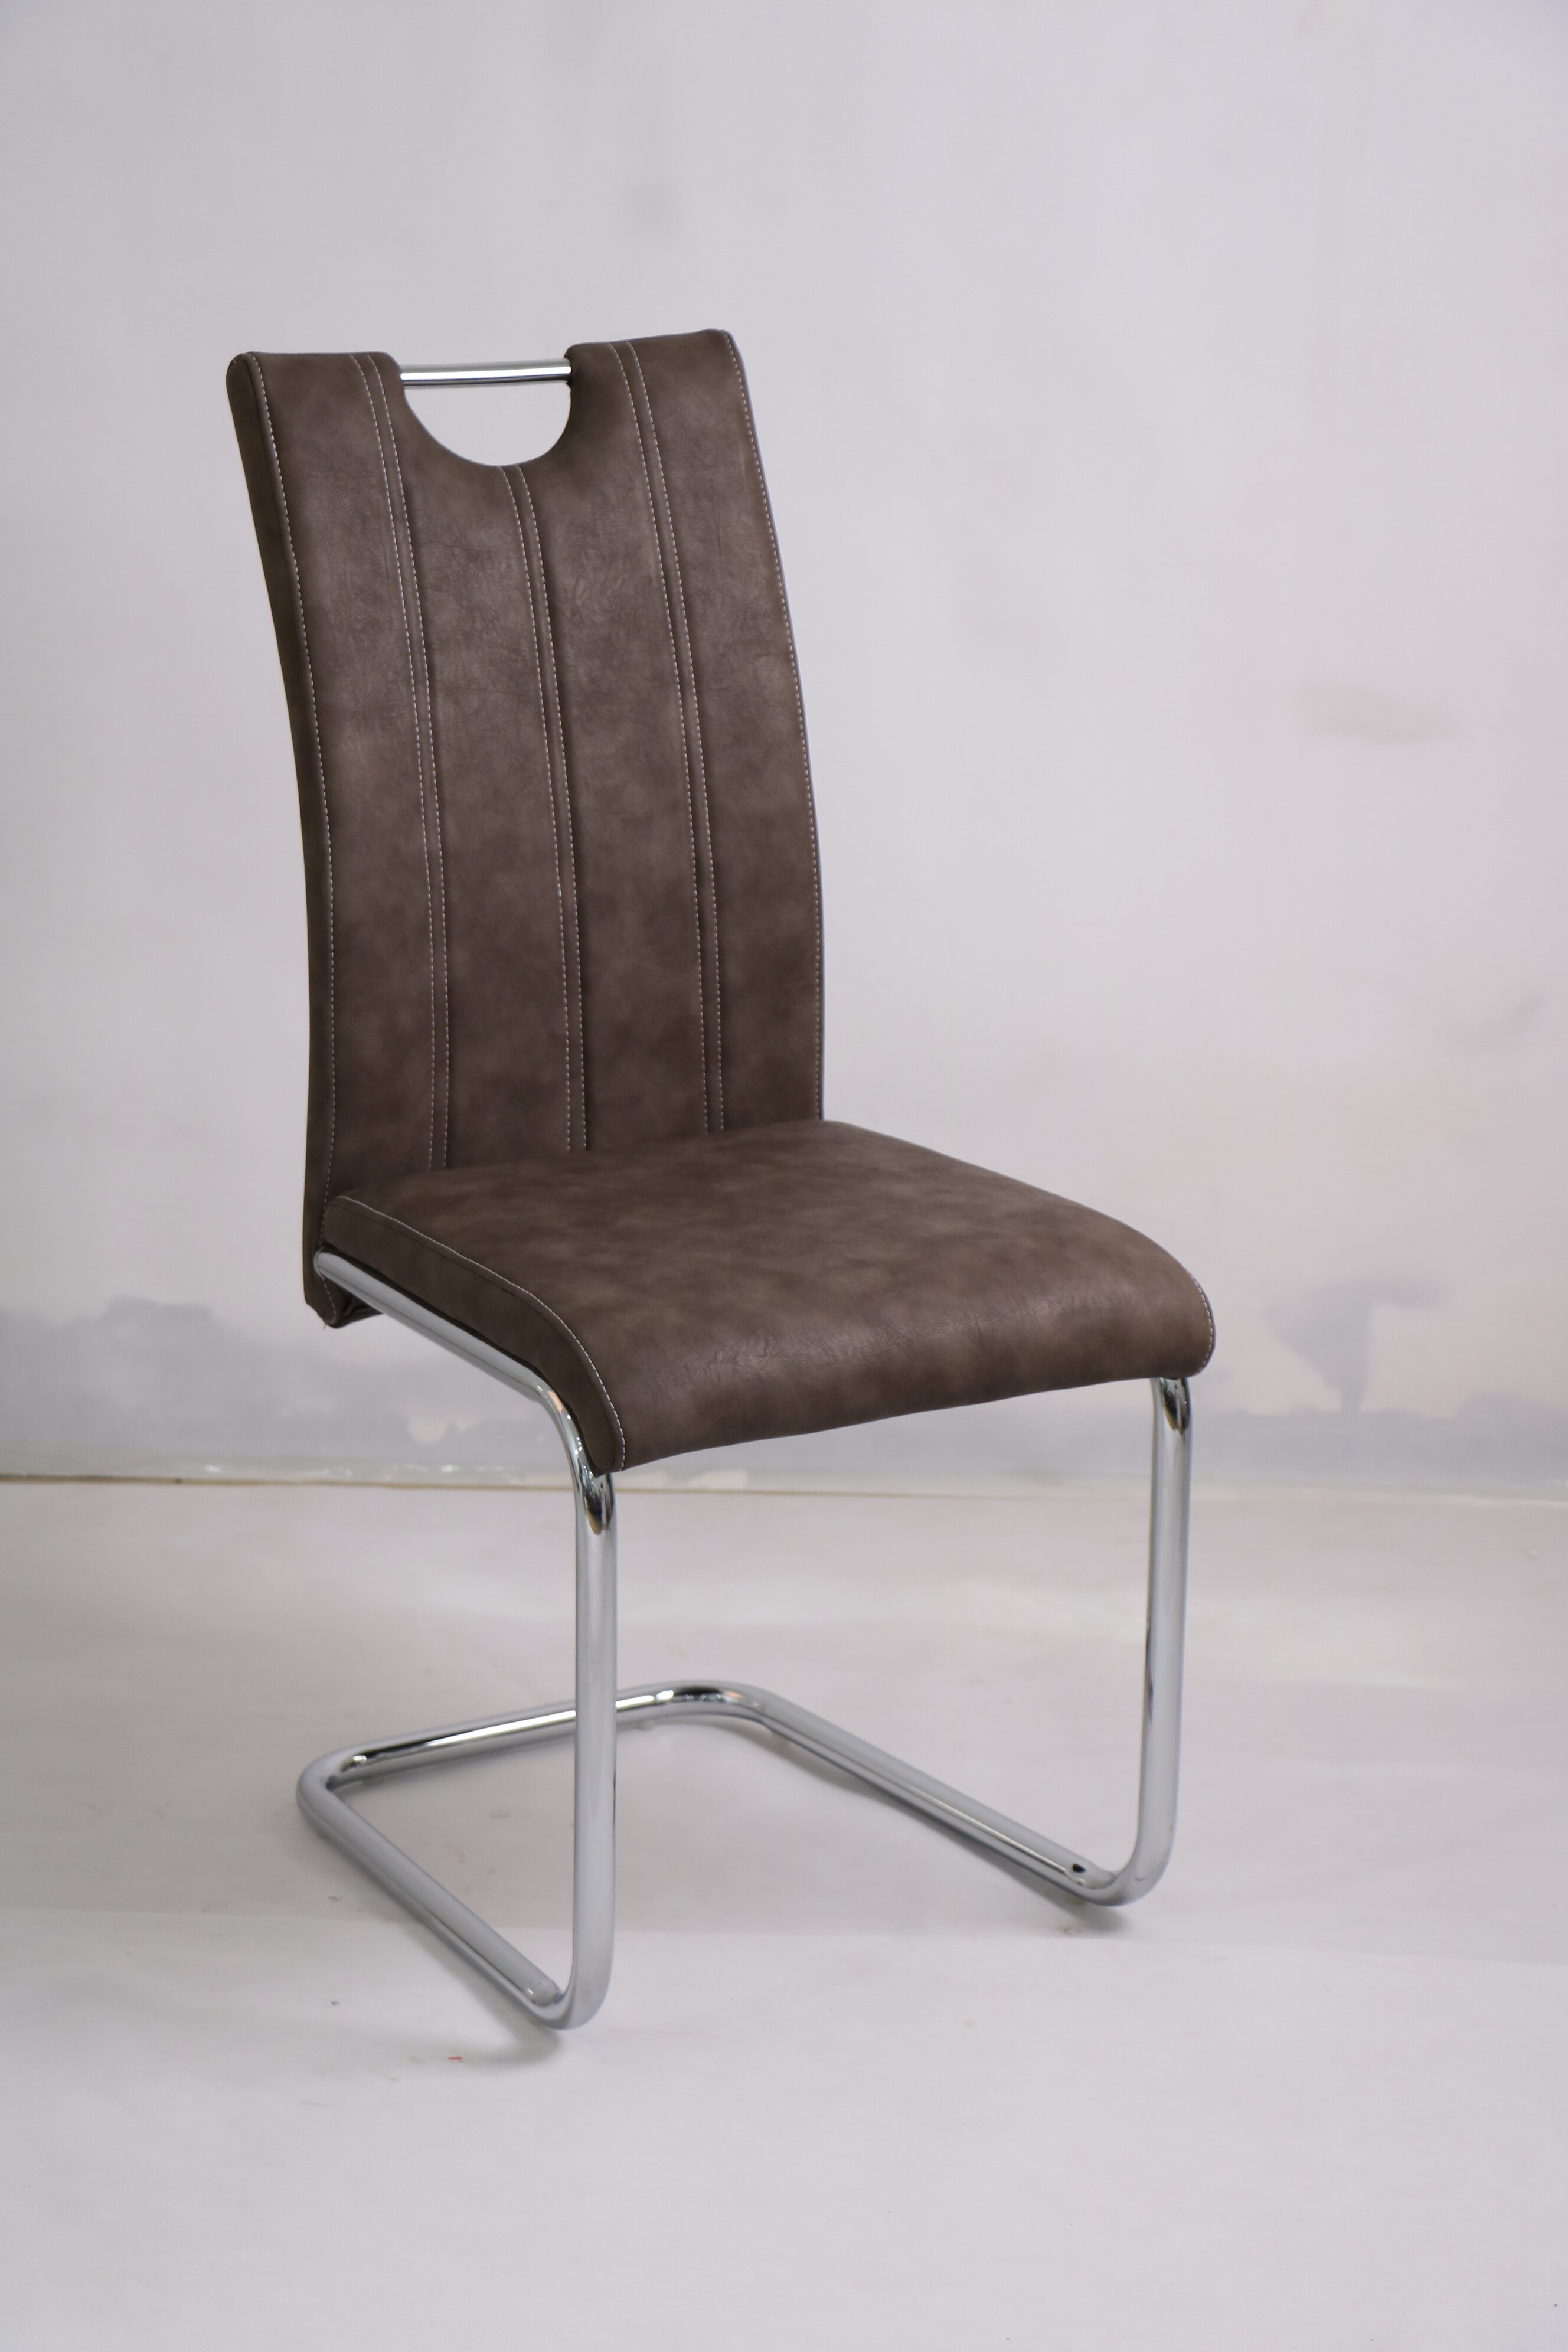 dining chair factory, dining chair exporter